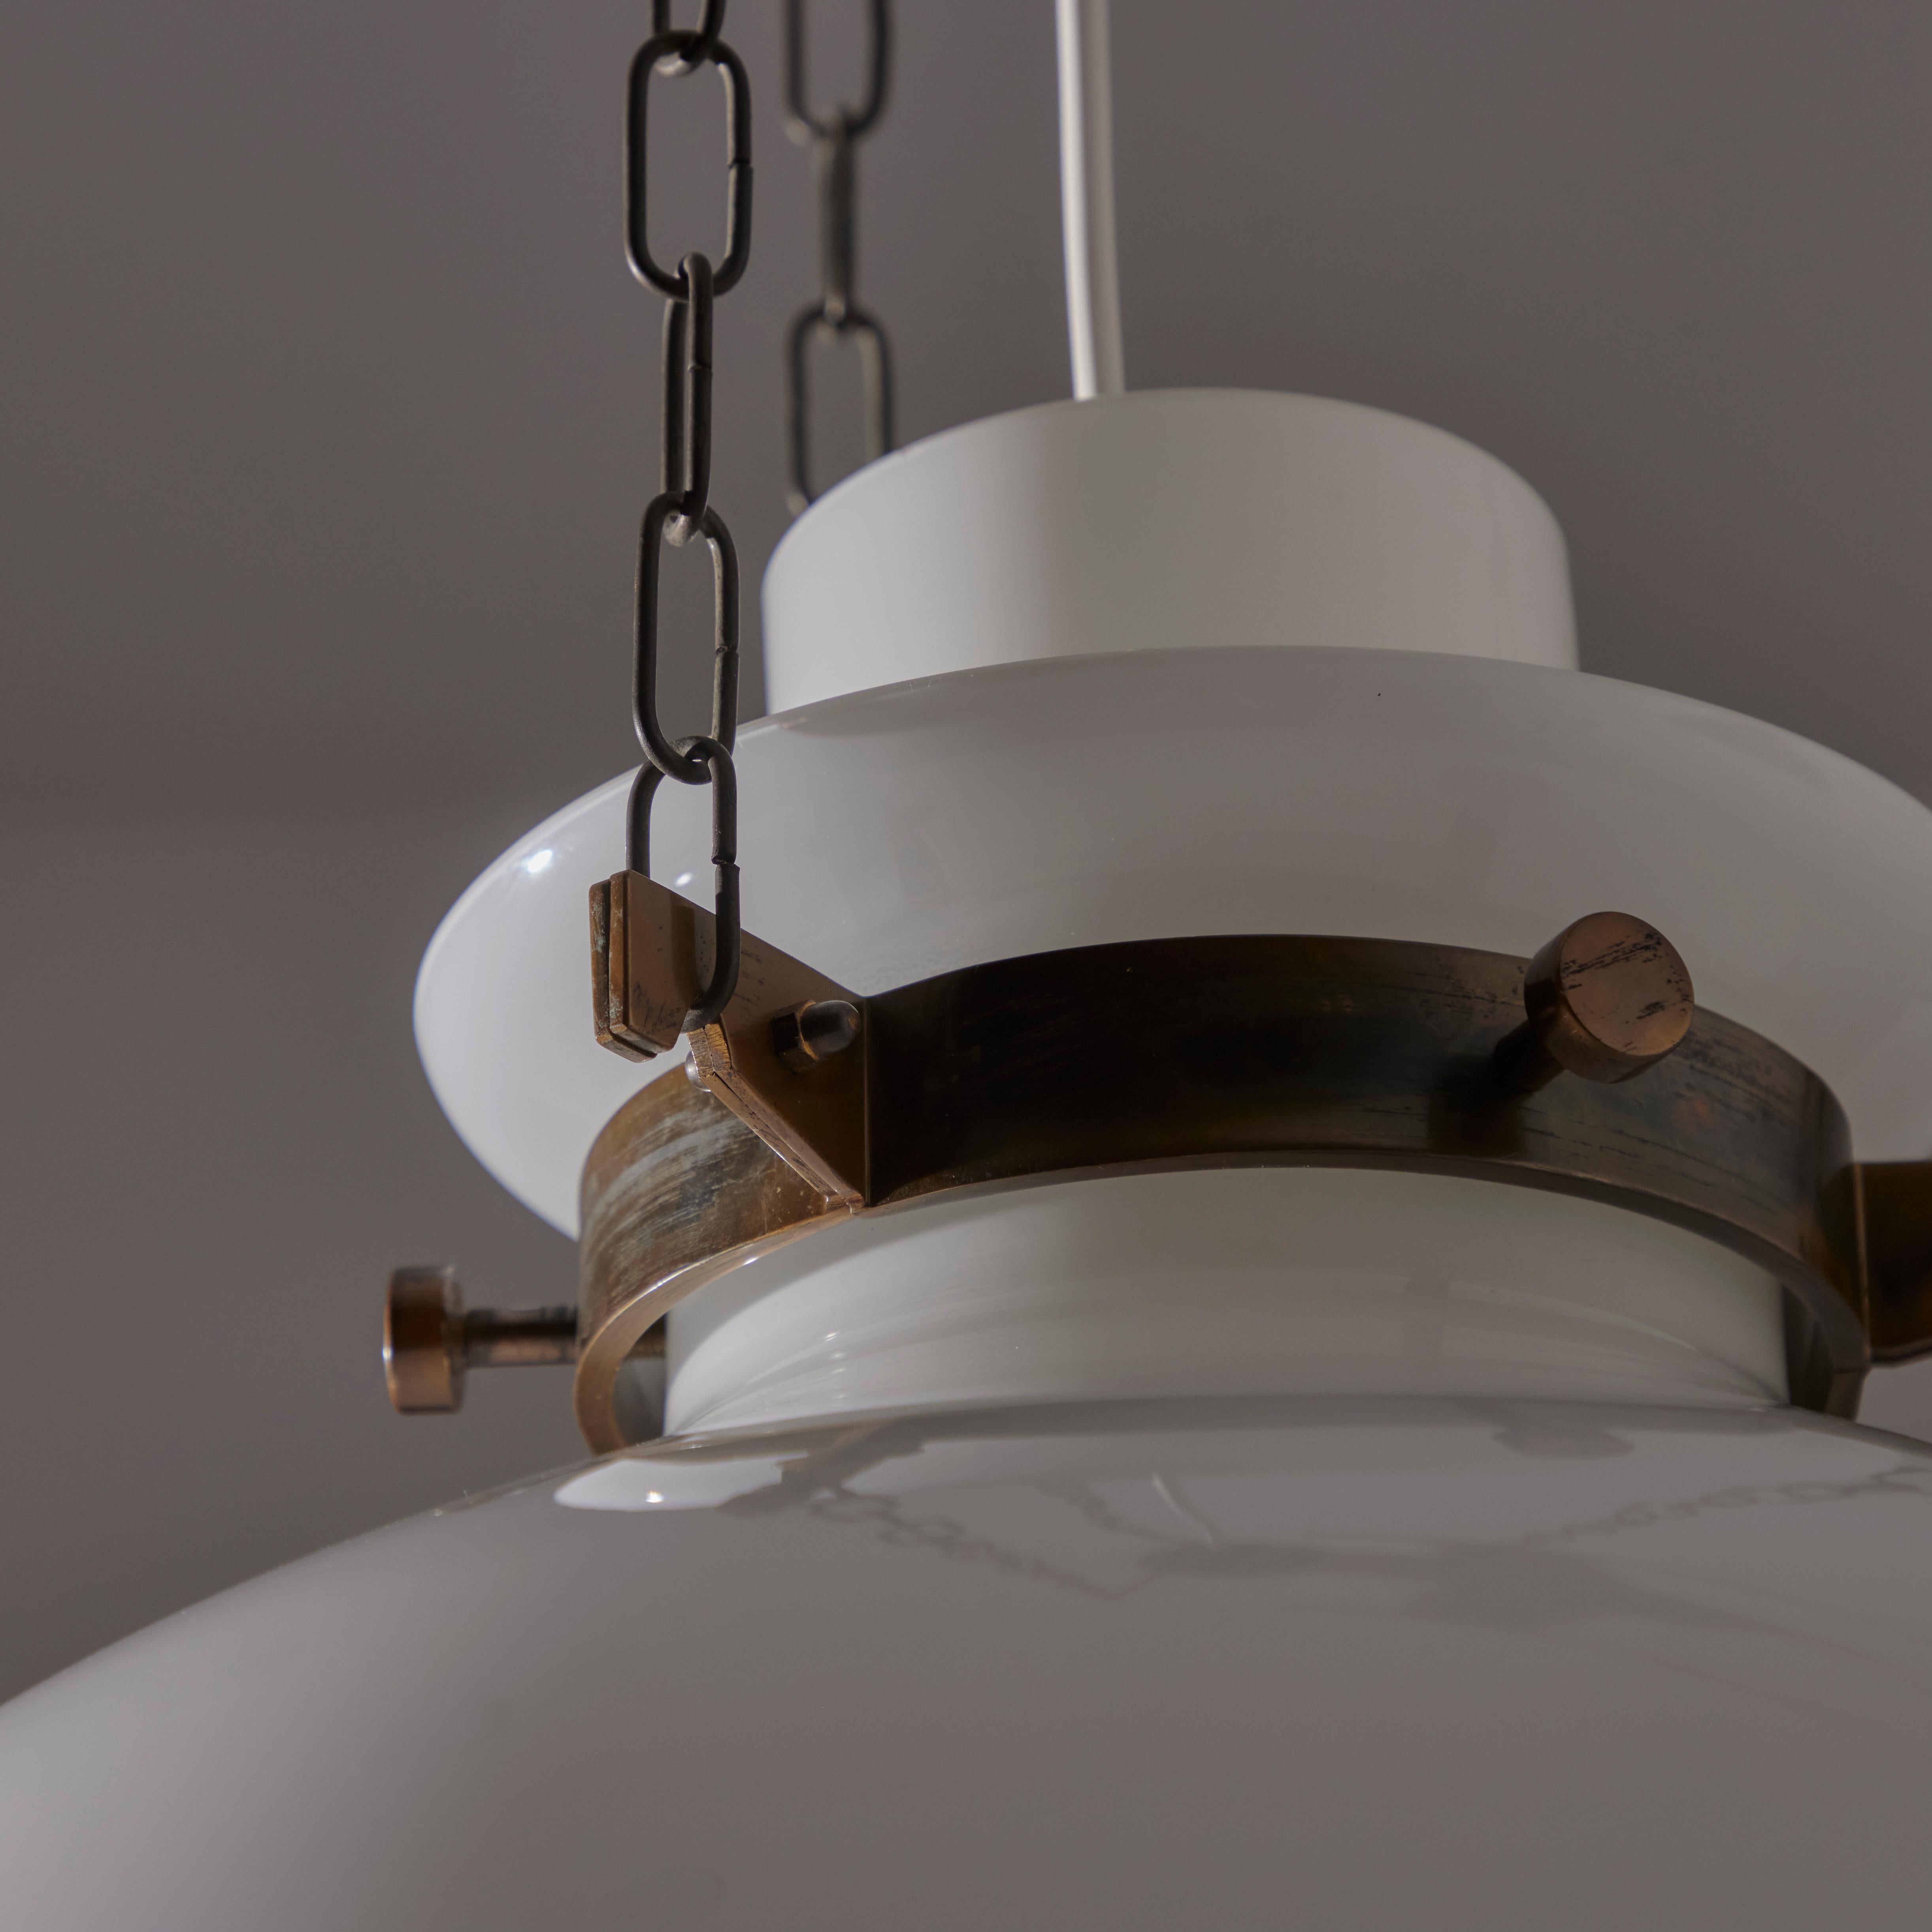 Mid-20th Century Ceiling Light by Paolo Caliari for Venini